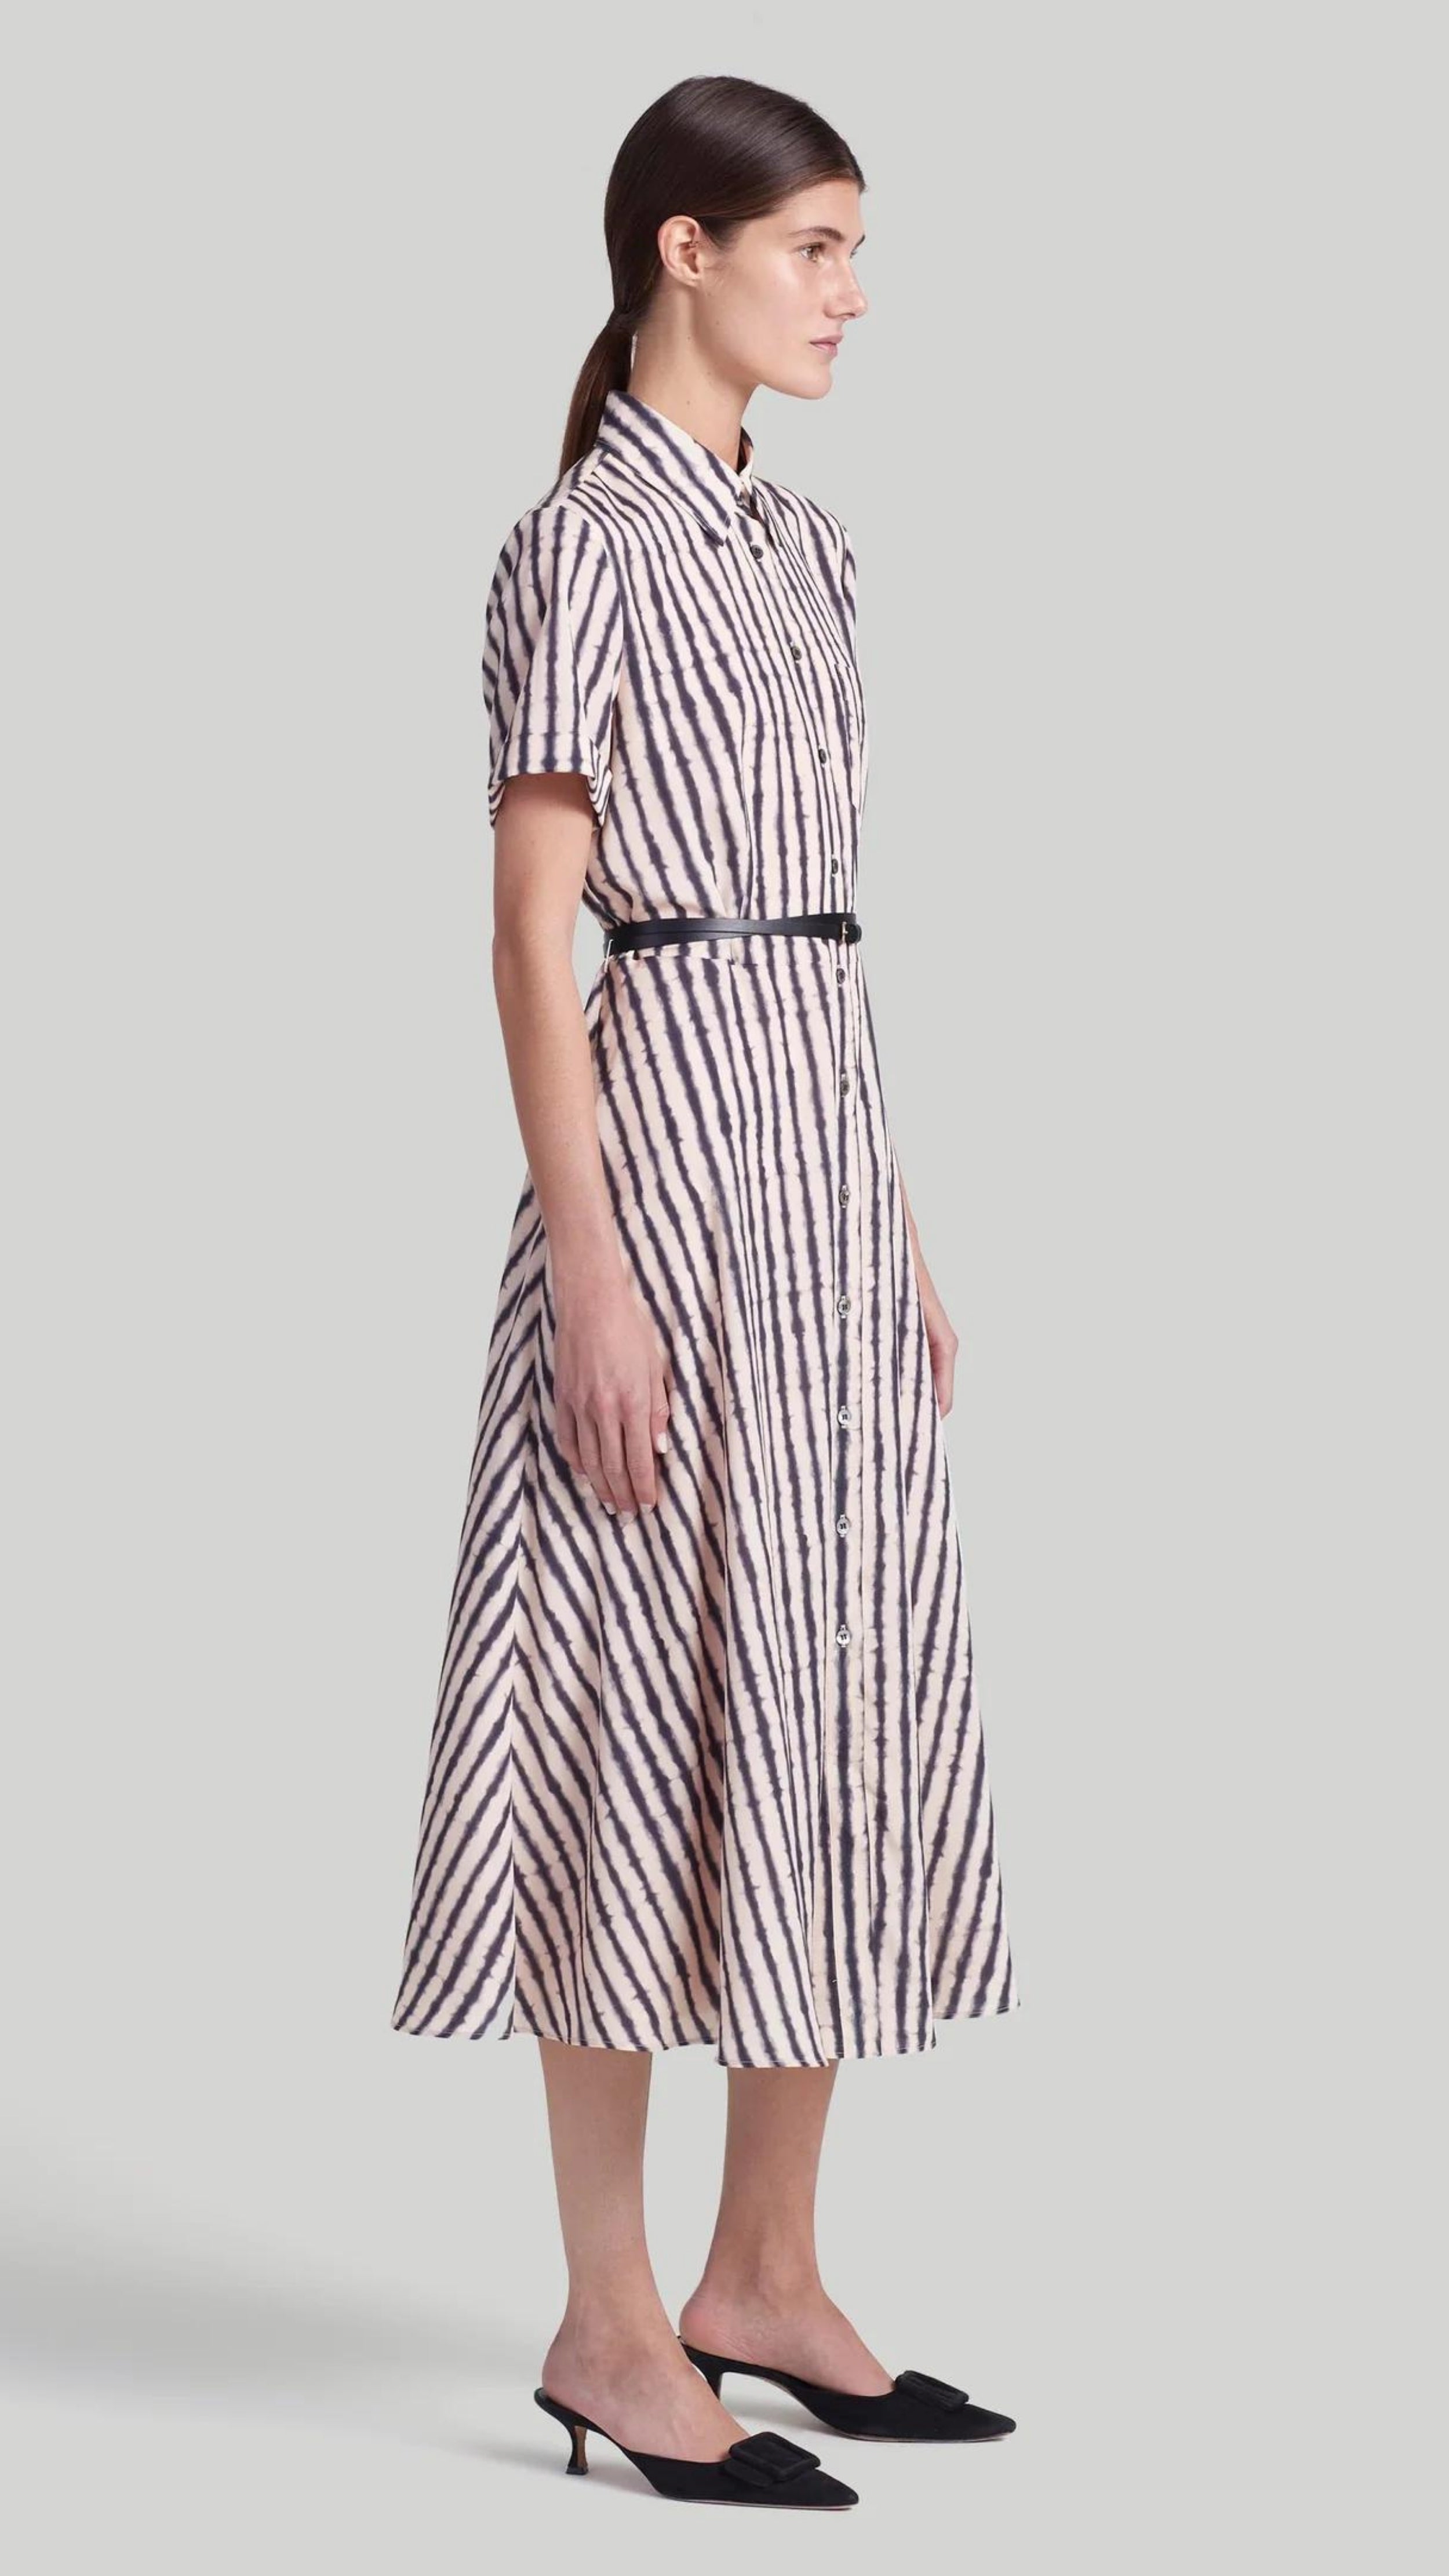 Altuzarra Kiera Dress The &#39;Kiera&#39; dress is designed with a small point collar, short sleeves and a flattering A-line skirt. It is detailed with a slim leather waist belt and features a black and white stripe pattern and a front breast pocket. Shown on model facing side.